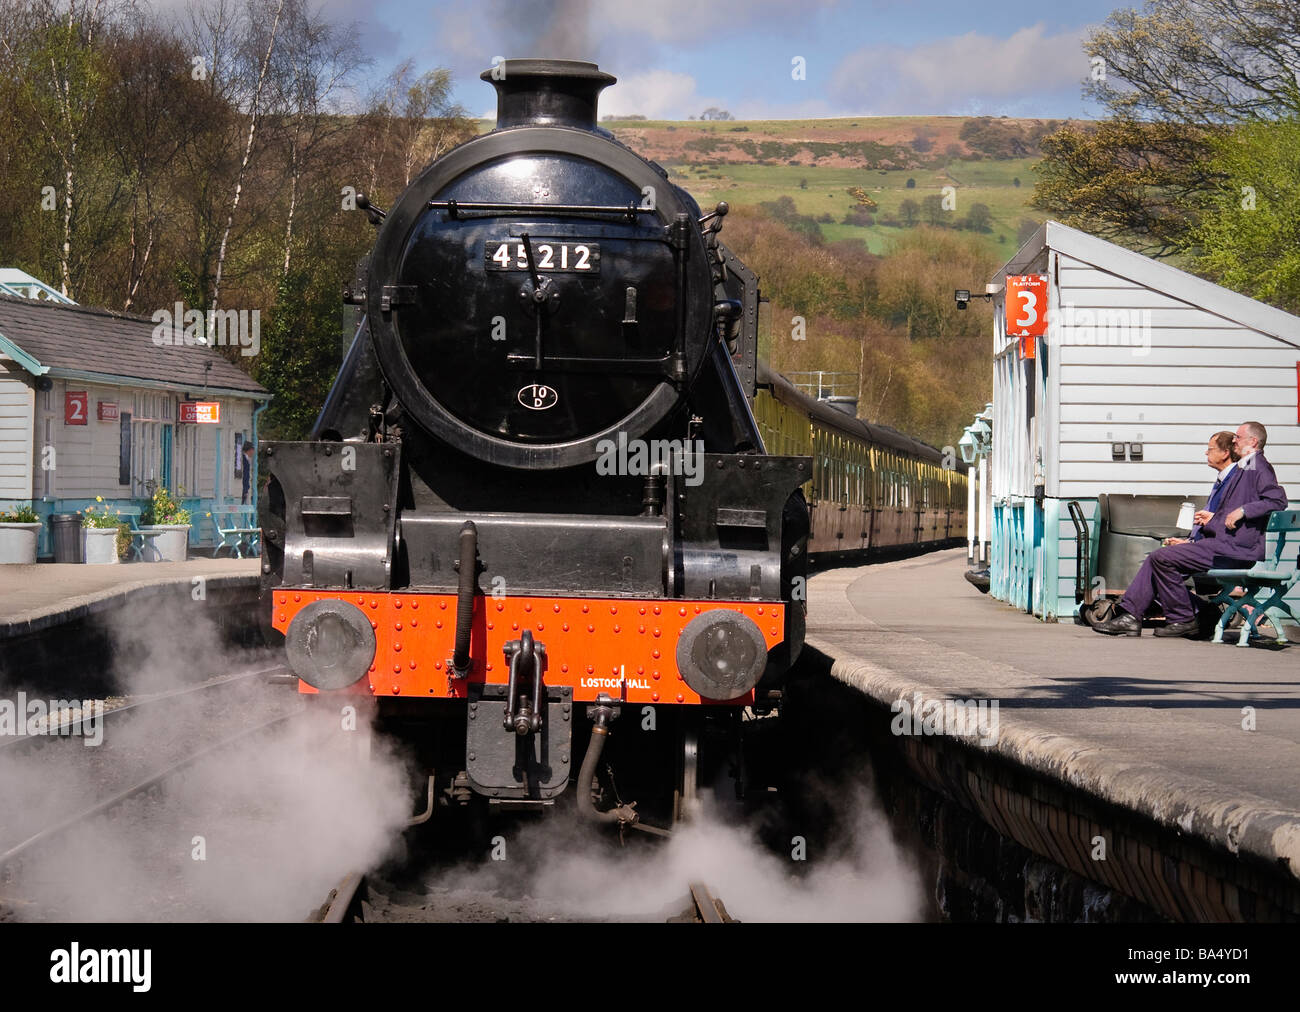 A tea break for the driver and fireman of this steam train at Grosmont station Stock Photo